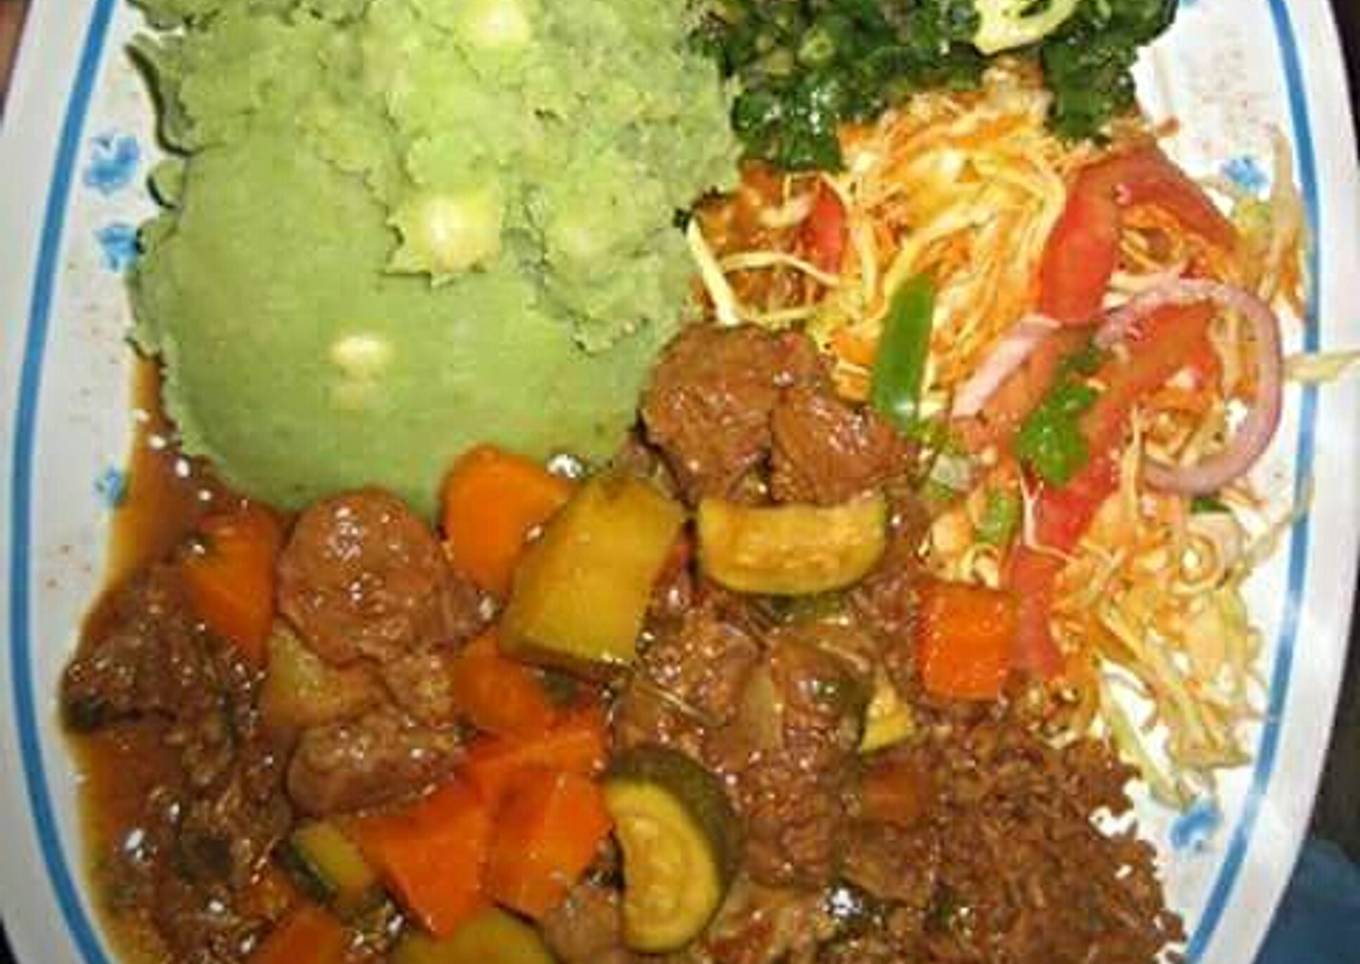 Mukimo served with beef stew and green vegetables